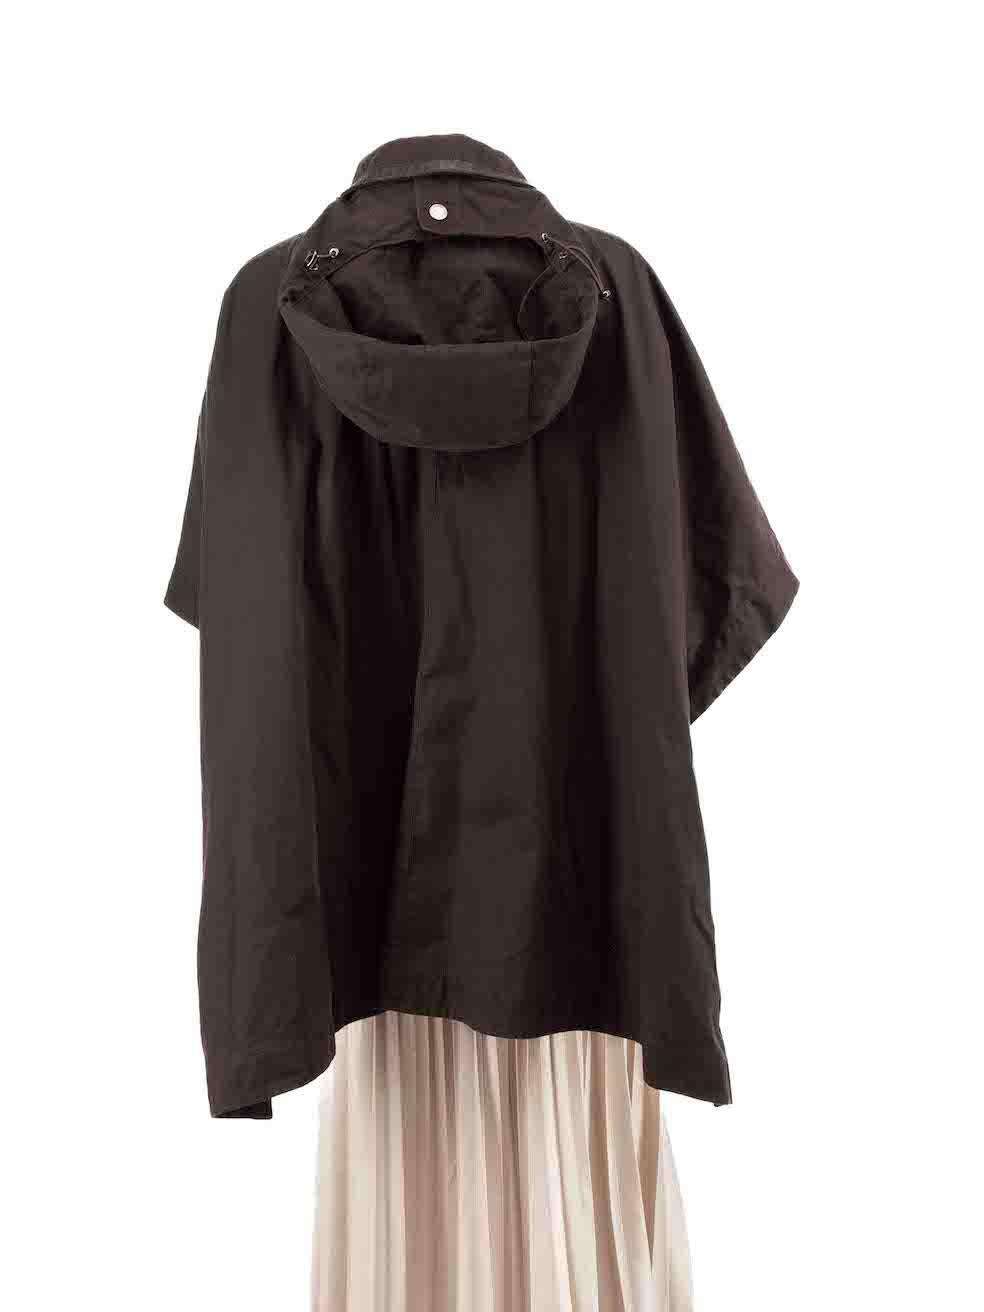 Max Mara Brown Belted Zipped Cape Size S In Good Condition For Sale In London, GB